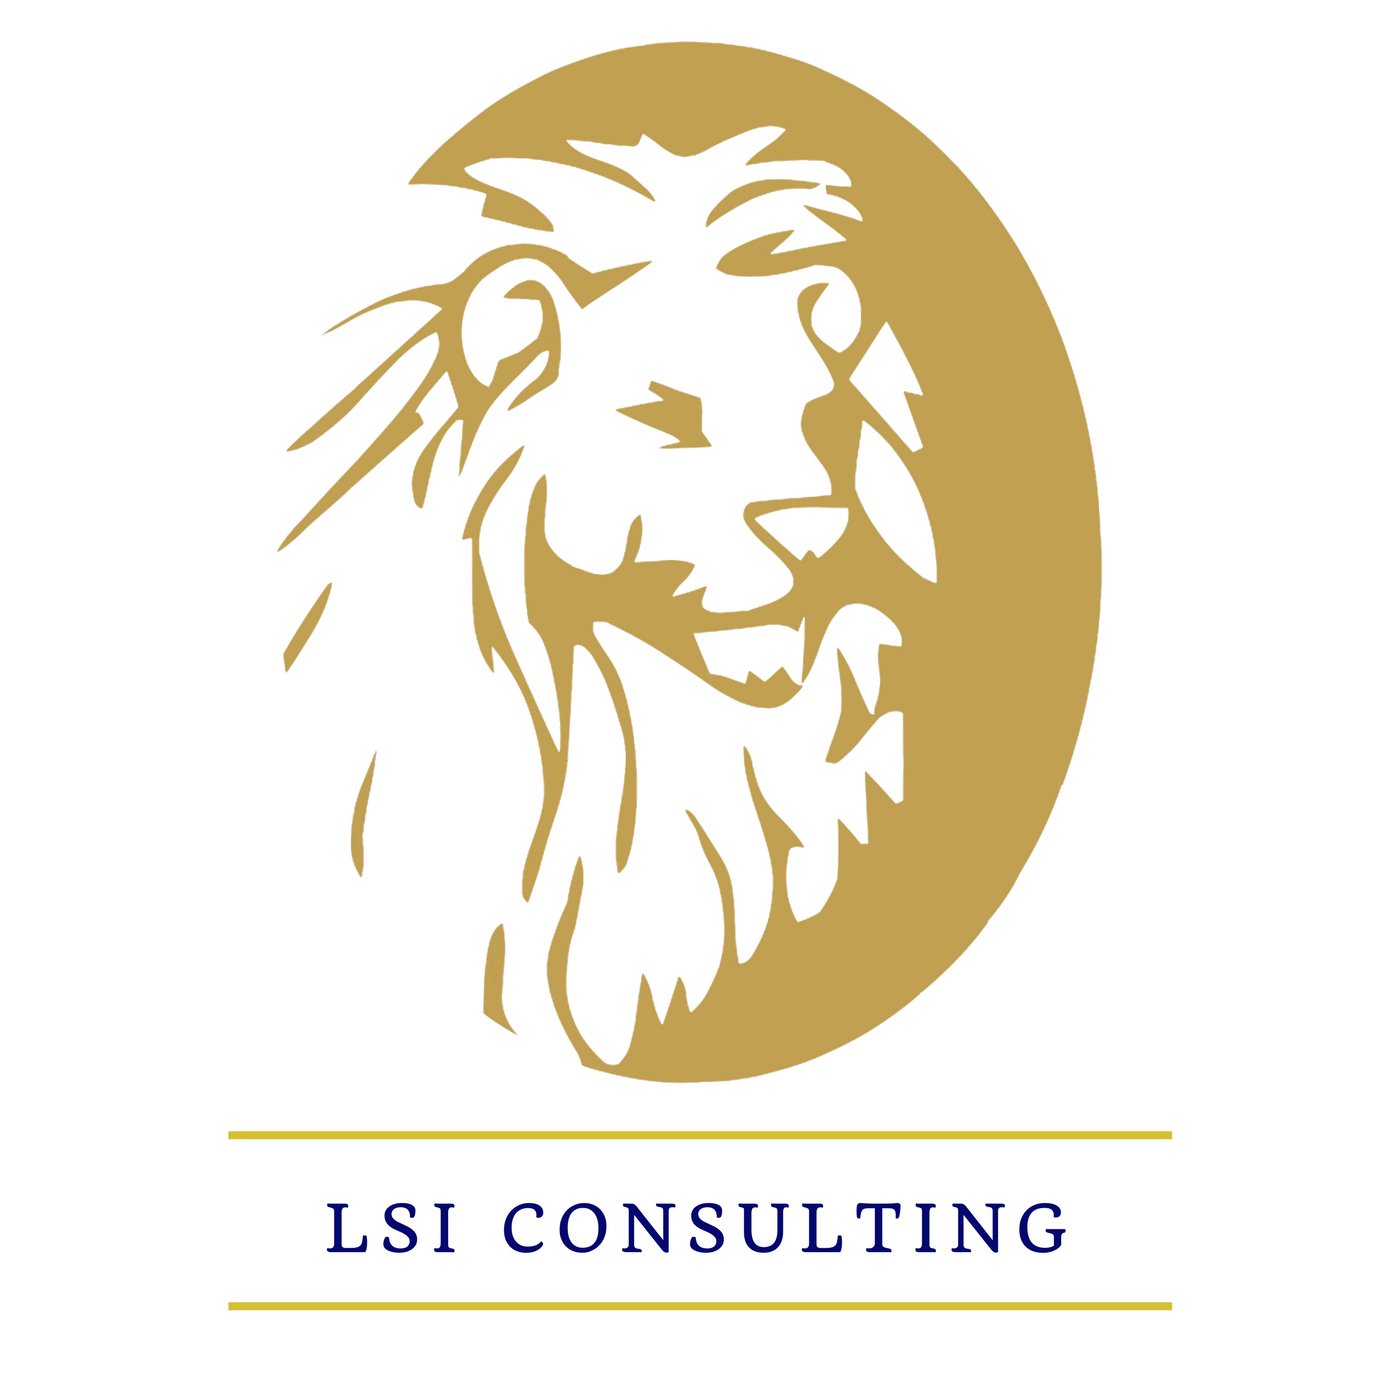 LSI Consulting is St. Louis’s top #sales and #marketing firm obsessed with creating a winning culture, innovation, and action!💥🏆